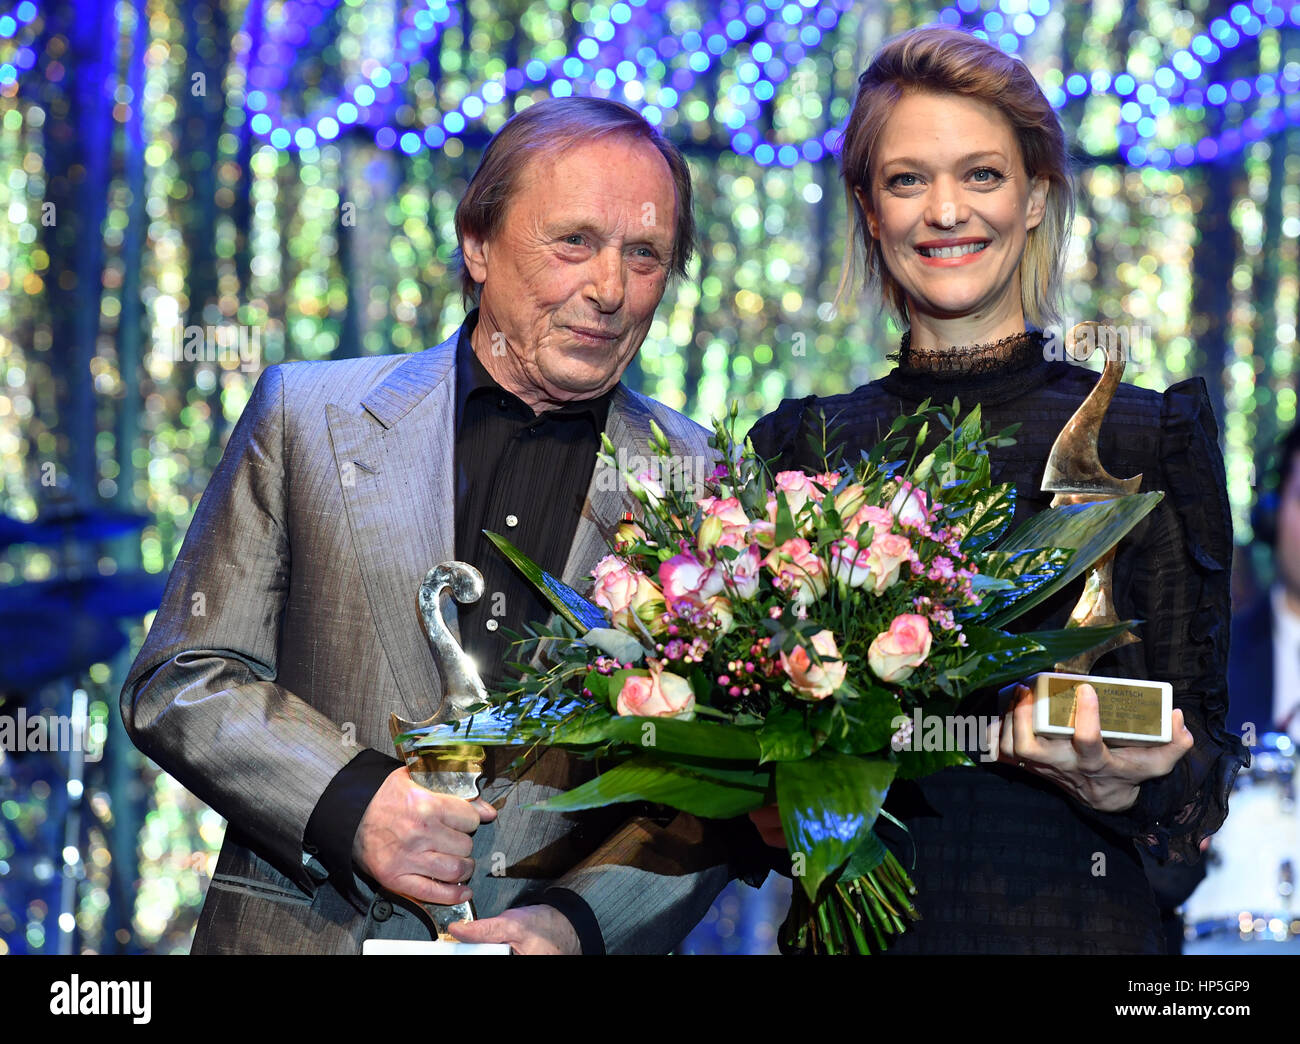 Berlin, Germany. 17th Feb, 2017. German actors Claus Theo Gaertner (L) and Heike Makatsch pose with their awards at the Italian film ball 'Notte delle Stelle' held during the 67th International Berlin Film Festival, also known as Berlinale, in Berlin, Germany, 17 February 2017. The Premio Bacco awards are presented during the annual film ball. Photo: Jens Kalaene/dpa-Zentralbild/dpa/Alamy Live News Stock Photo